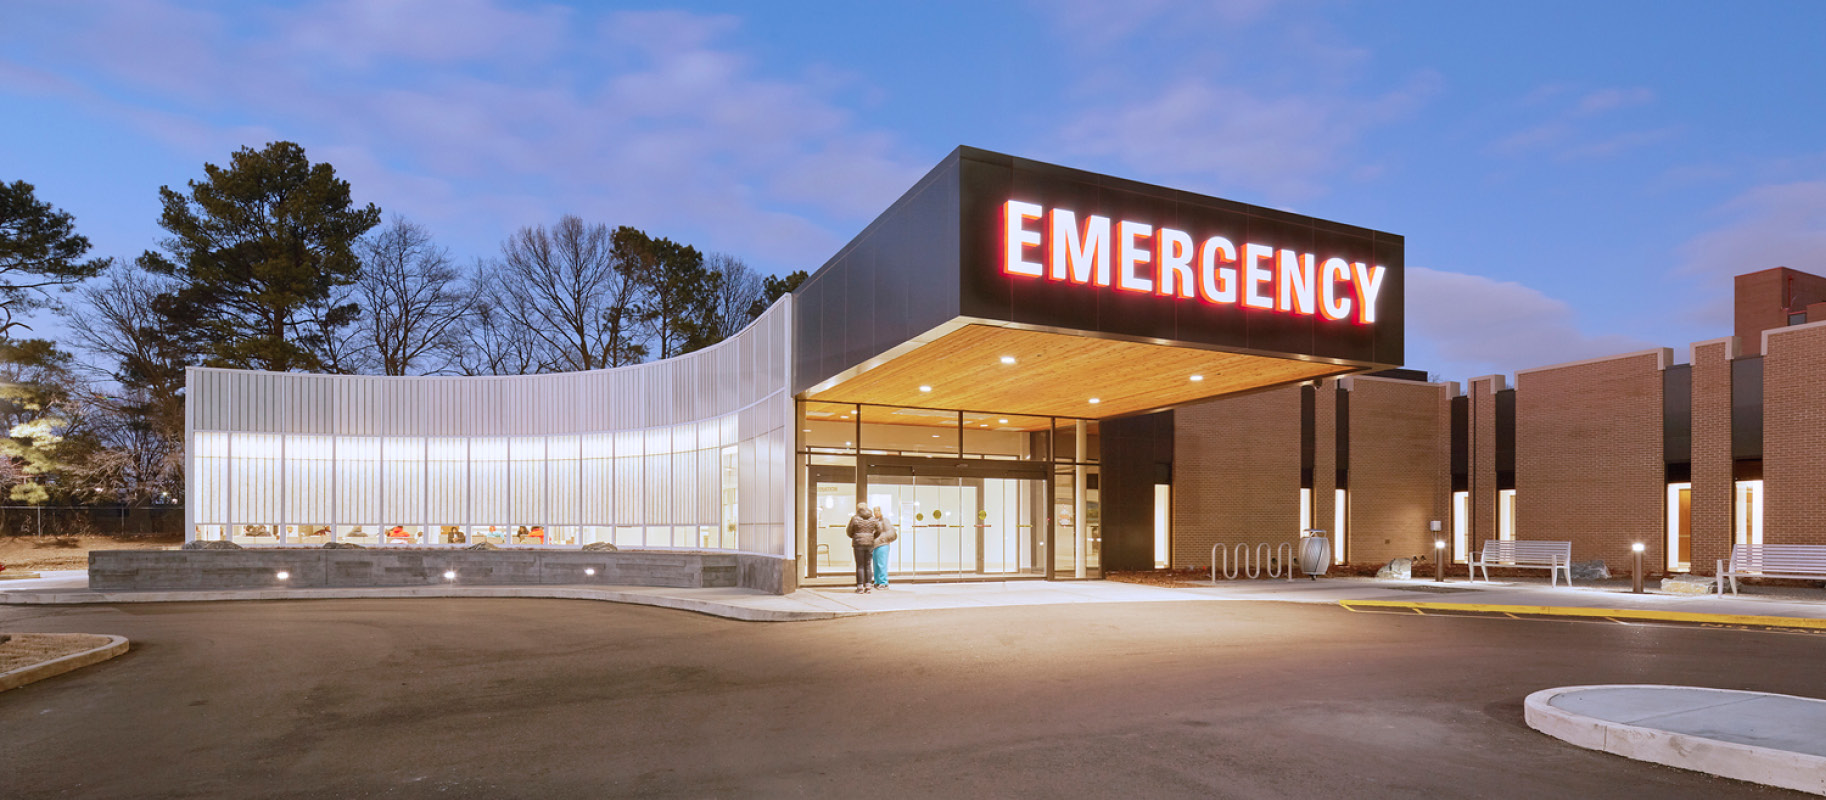 Exterior of emergency room at night time with large "Emergency" sign over entrance and curved Kalwall wall system